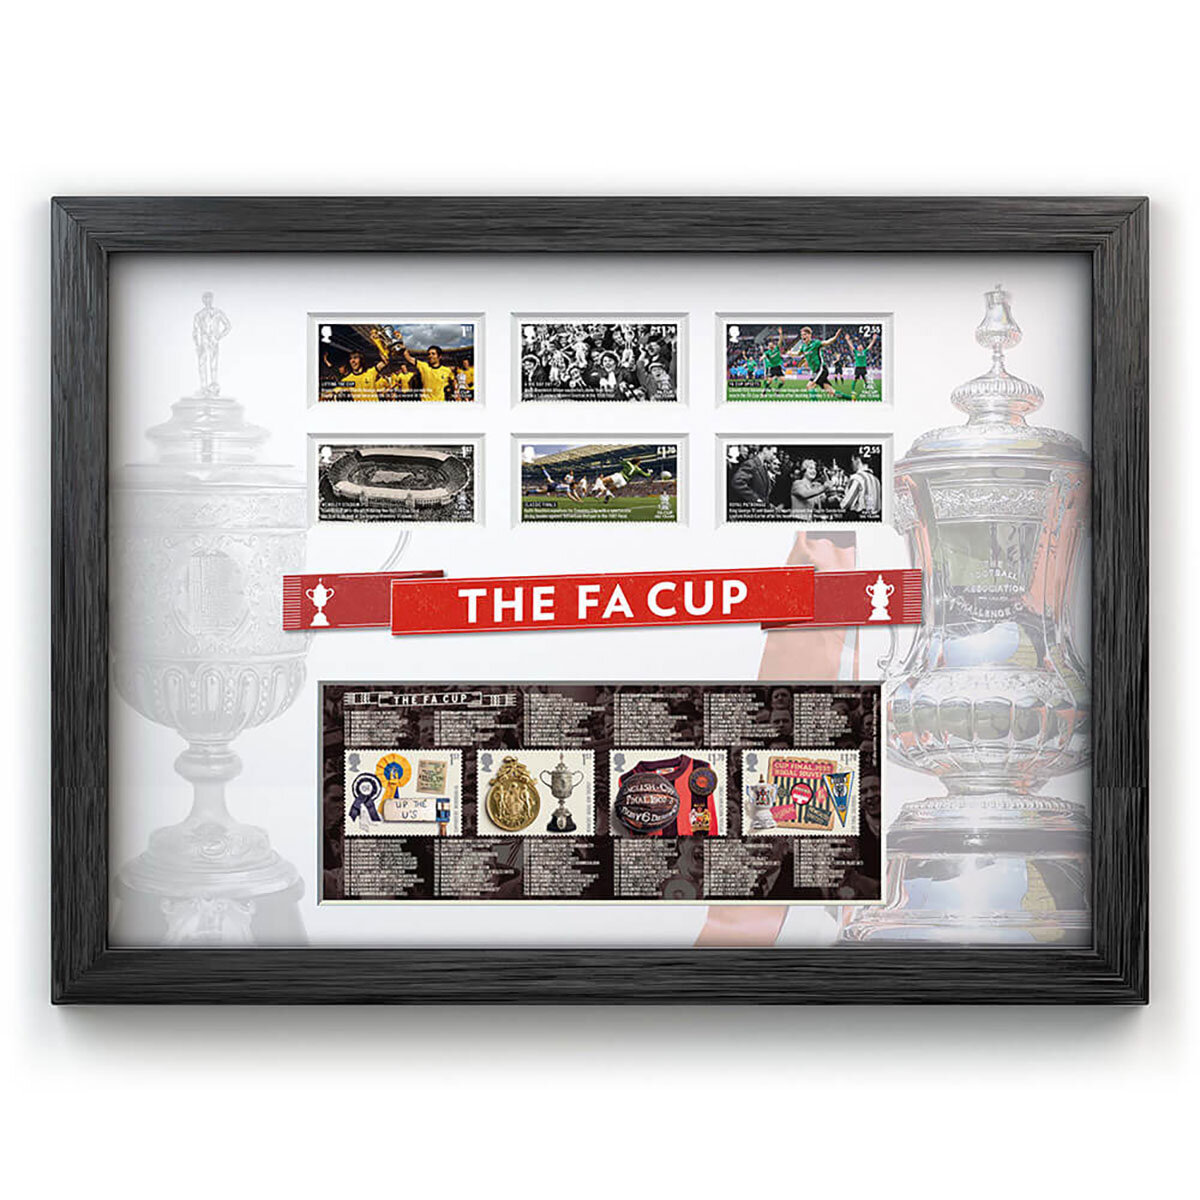 Buy The FA Cup Framed Stamps Overview Image at Costco.co.uk